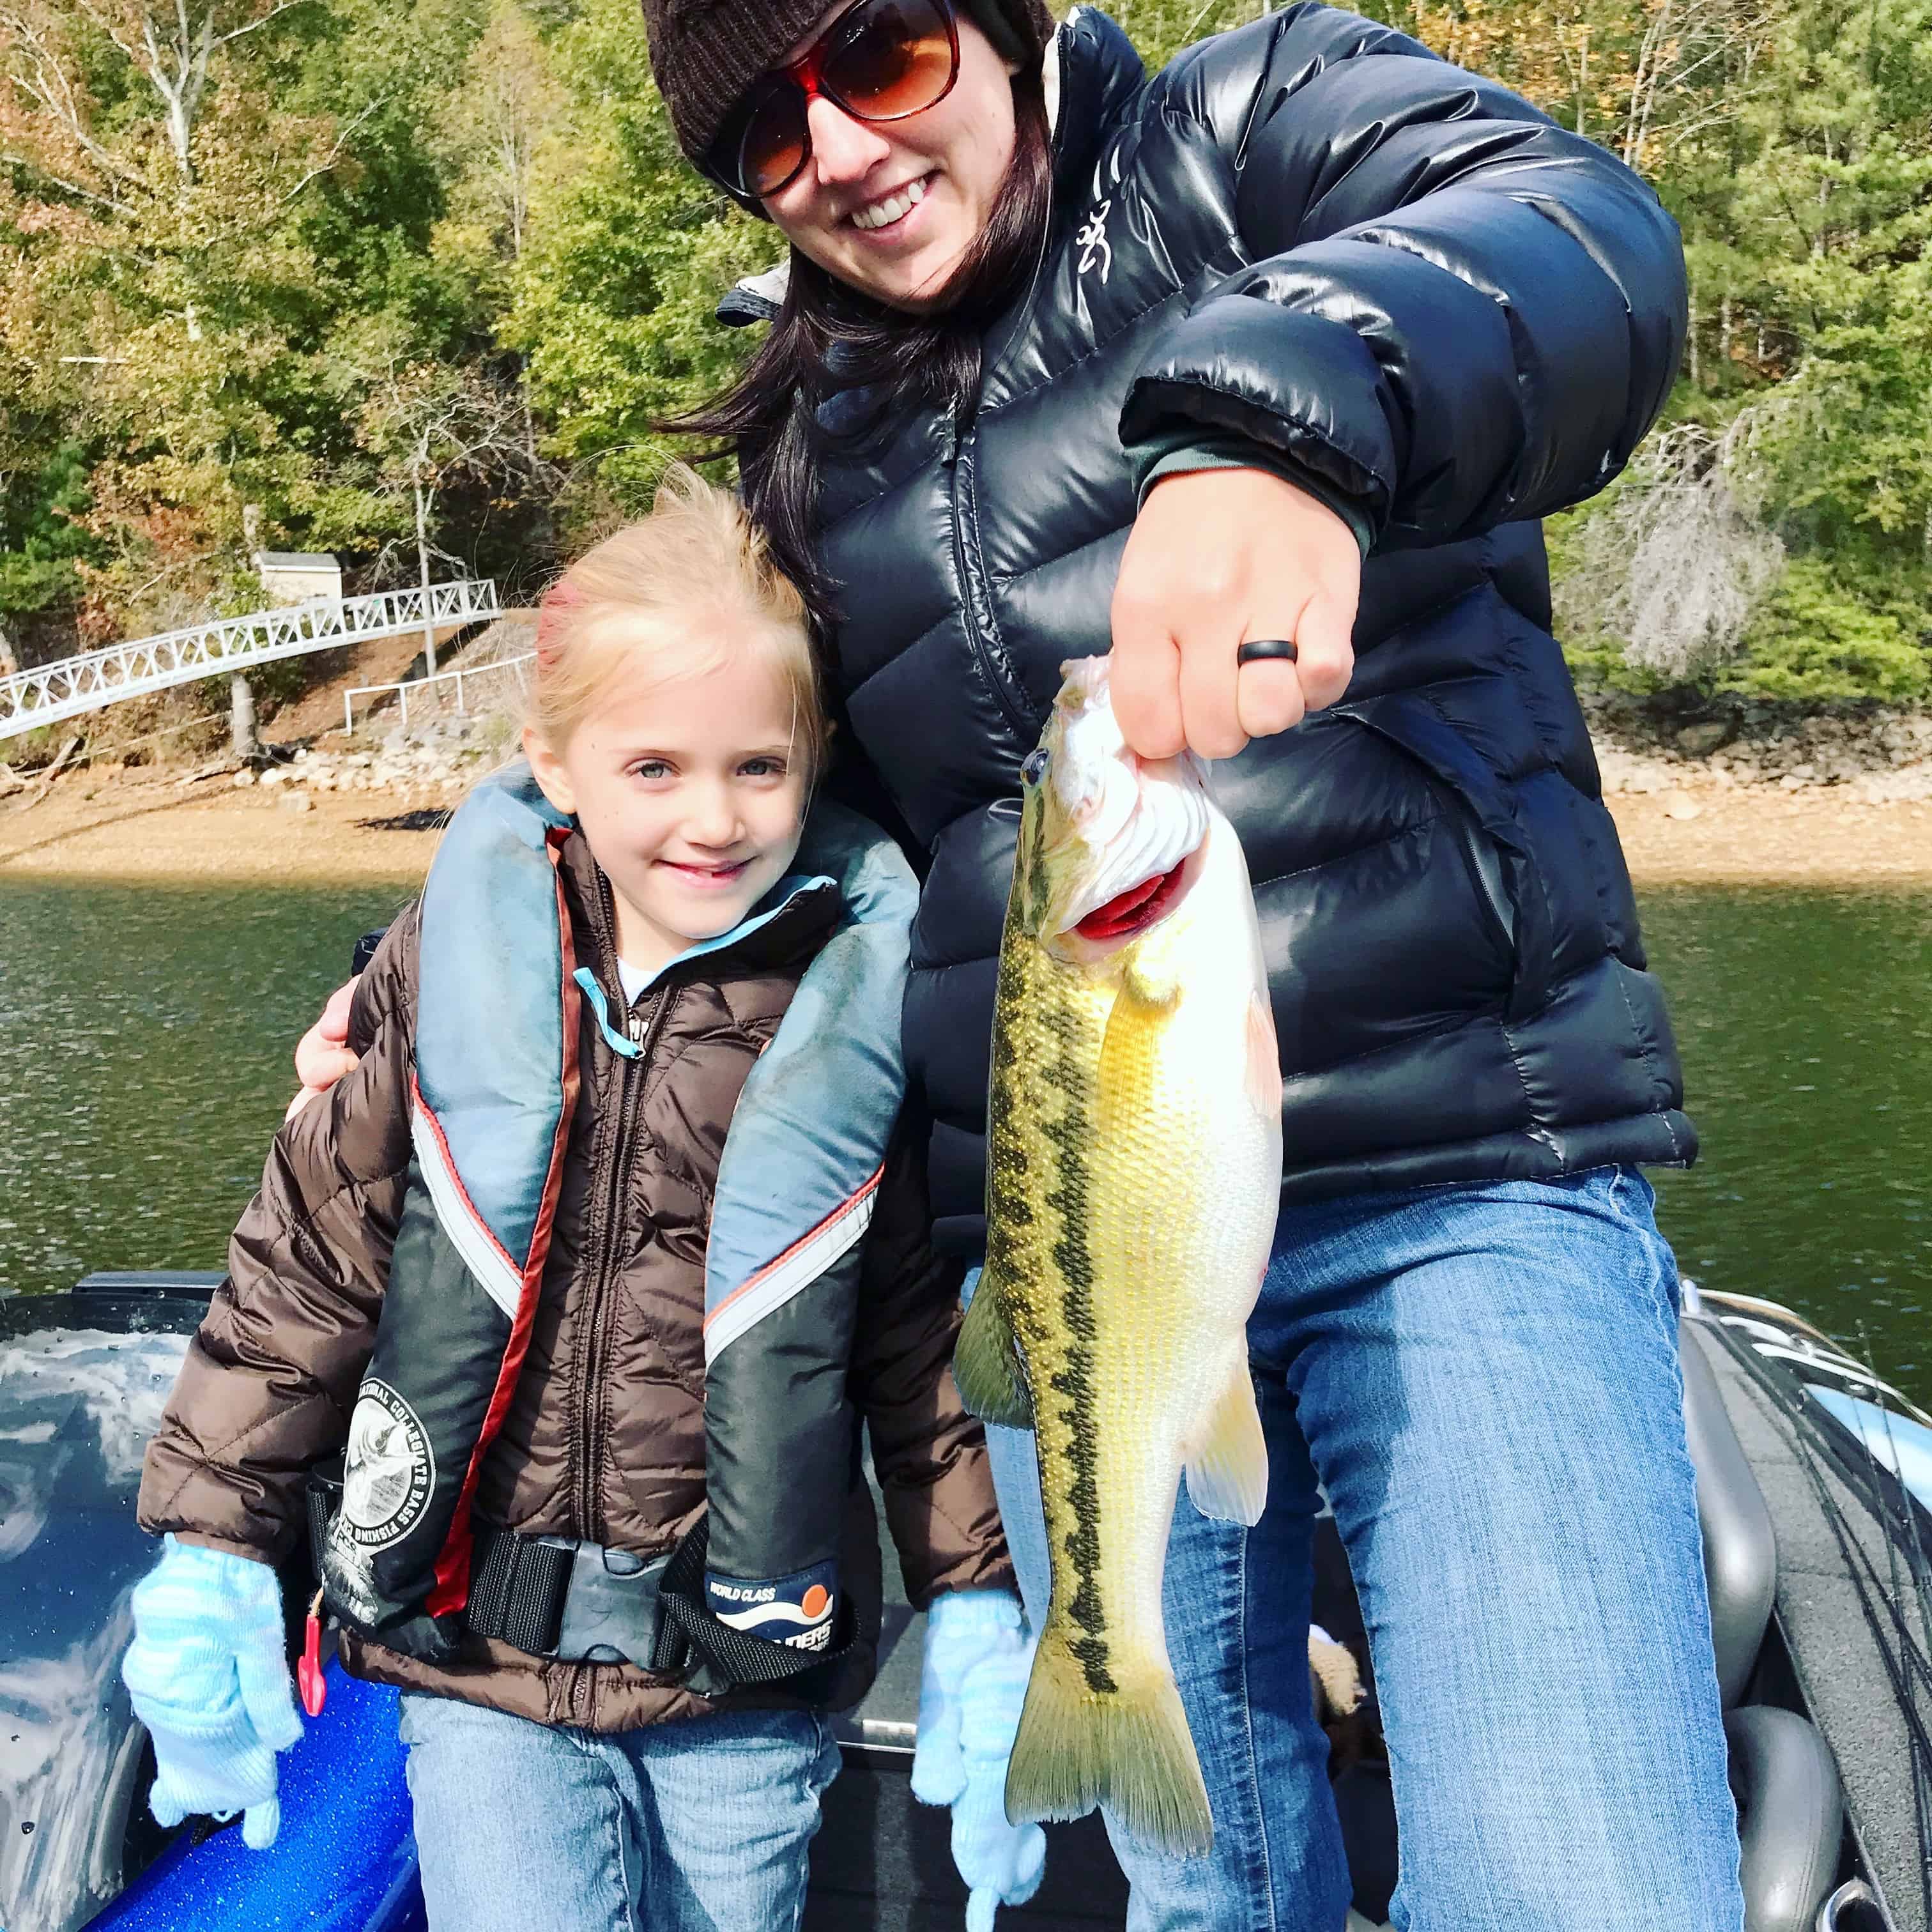 Smith Lake fishing and camping is fun for the whole family! Part of the Alabama Bass Trail, there's bass fishing and a whole lot more.